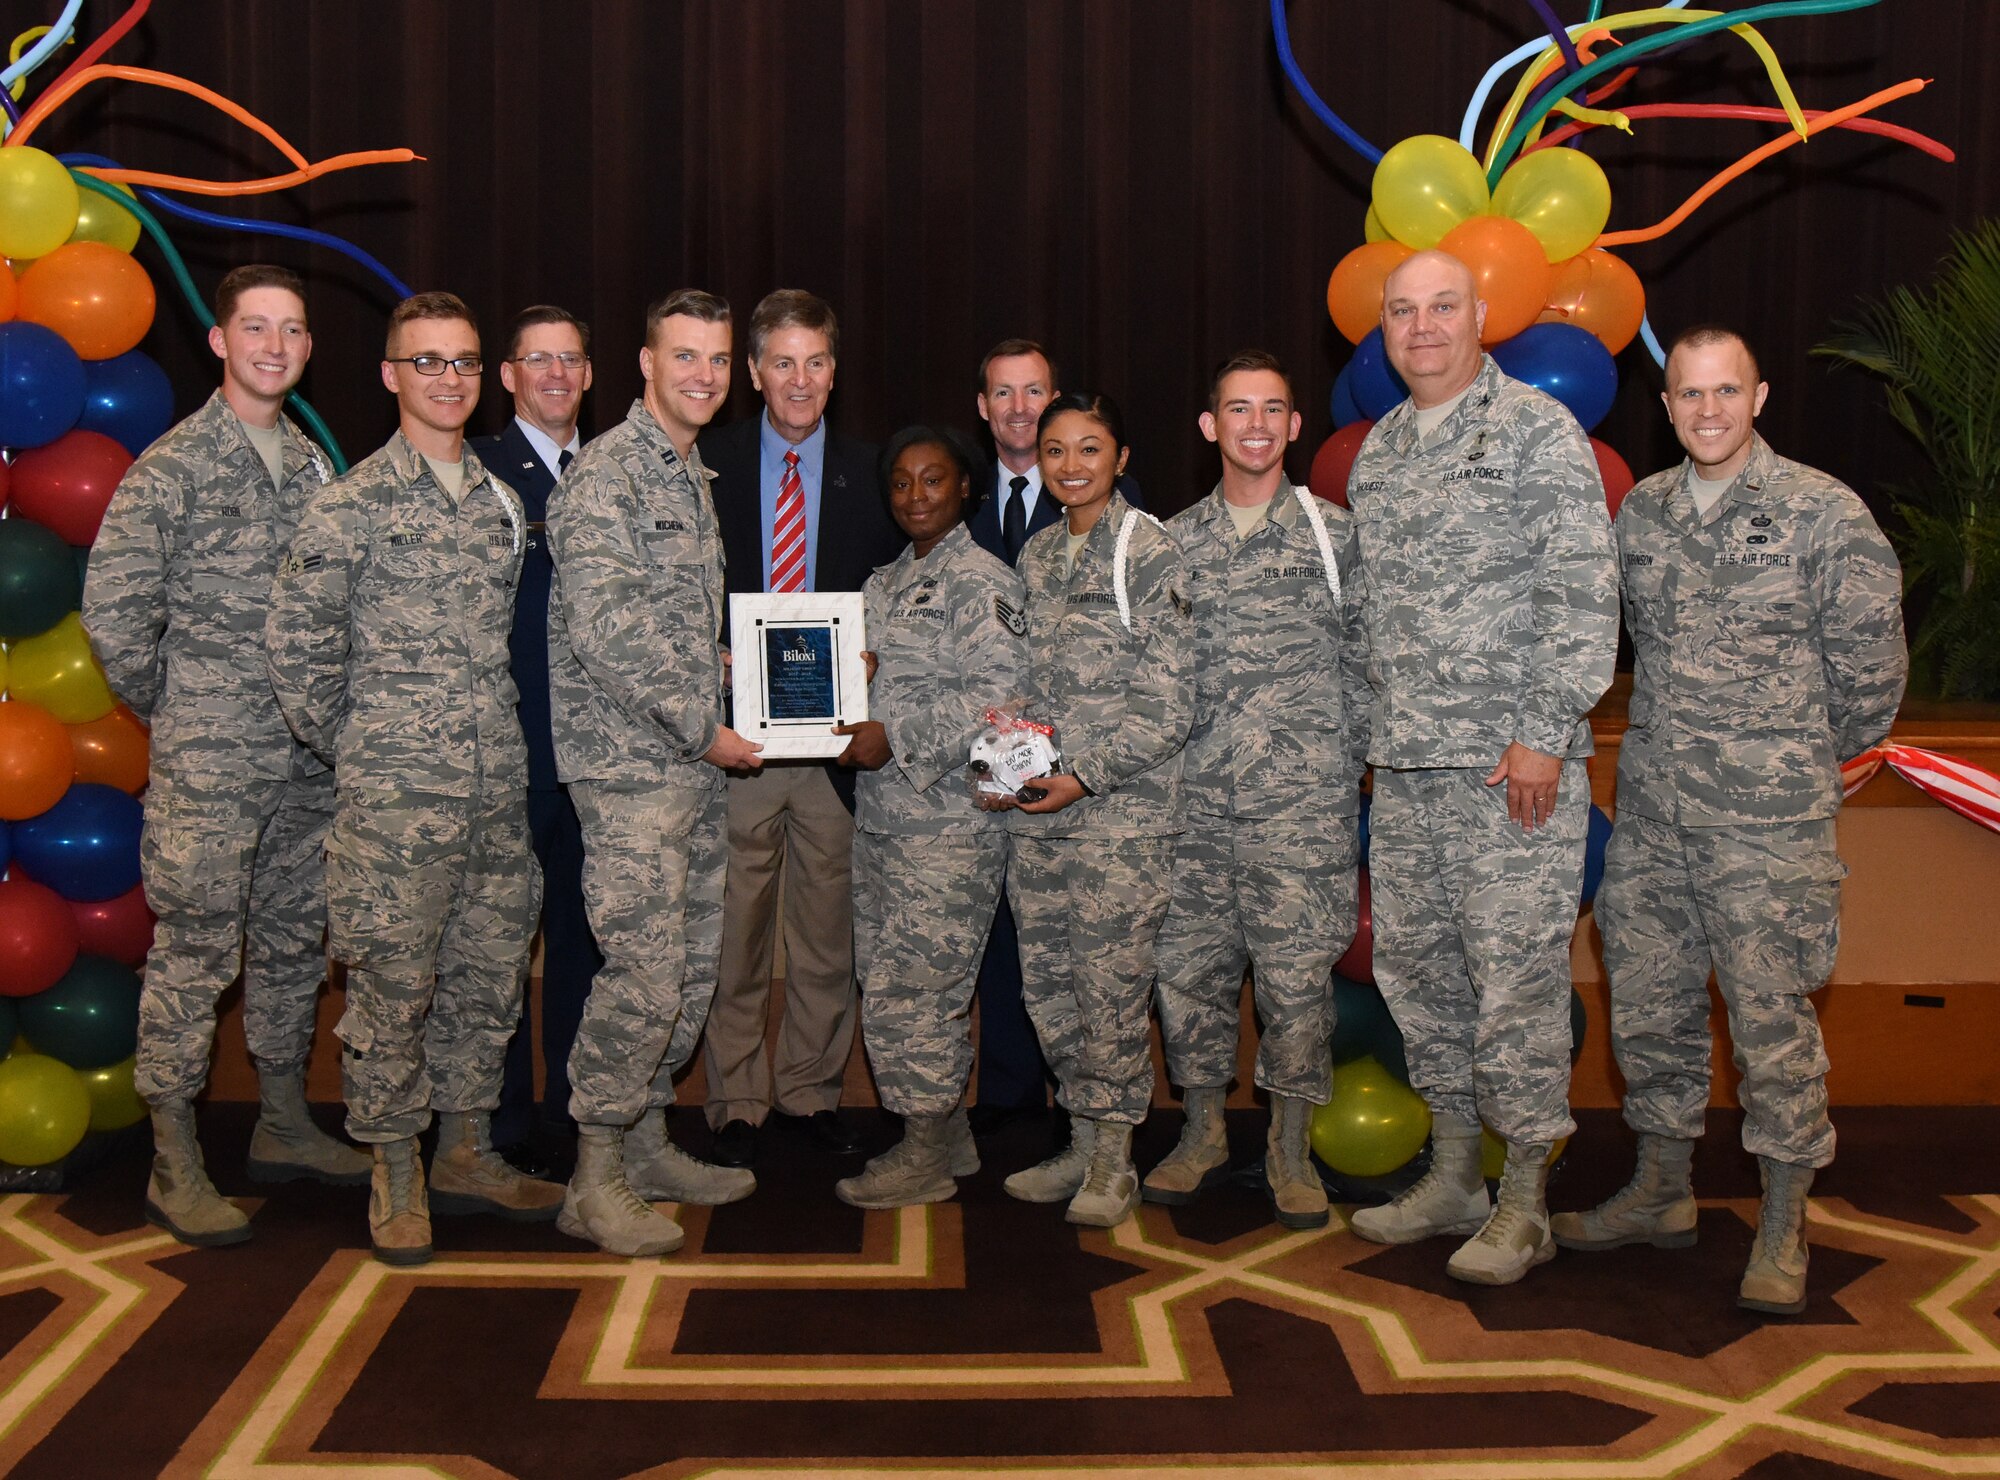 Members of the Keesler Air Force Base Fishbowl Student Ministry Center White Rope Program pose for a photo after accepting the Military Group Volunteer of the Year award during the 35th Annual City of Biloxi Volunteer Recognition Ceremony in the Biloxi Civic Center at Biloxi, Mississippi, April 24, 2018. The ceremony honored individuals and groups who volunteered time and energy to improve their communities. (U.S. Air Force photo by Kemberly Groue)